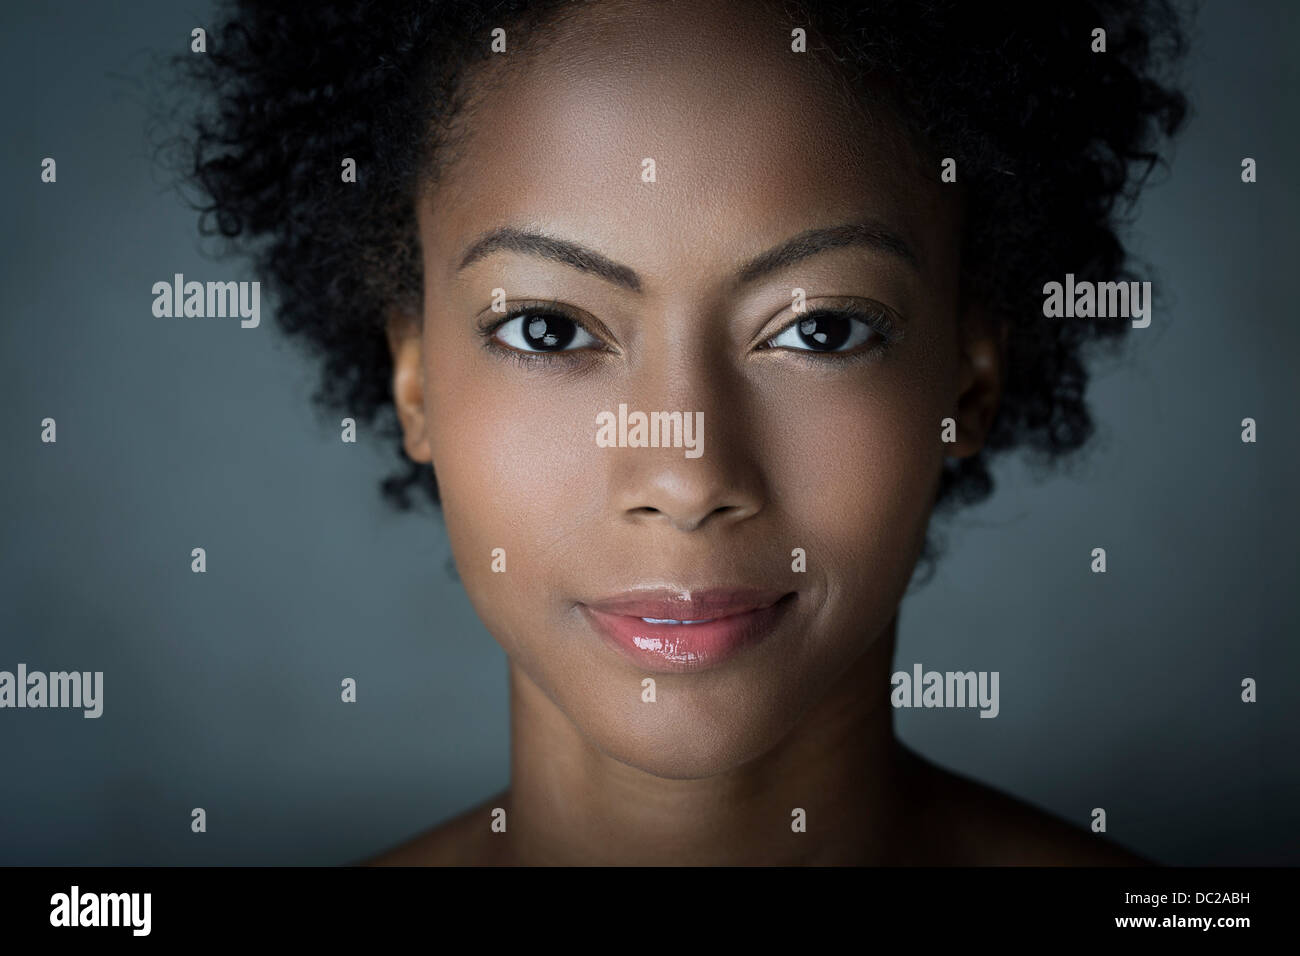 Portrait of woman with afro hair Stock Photo